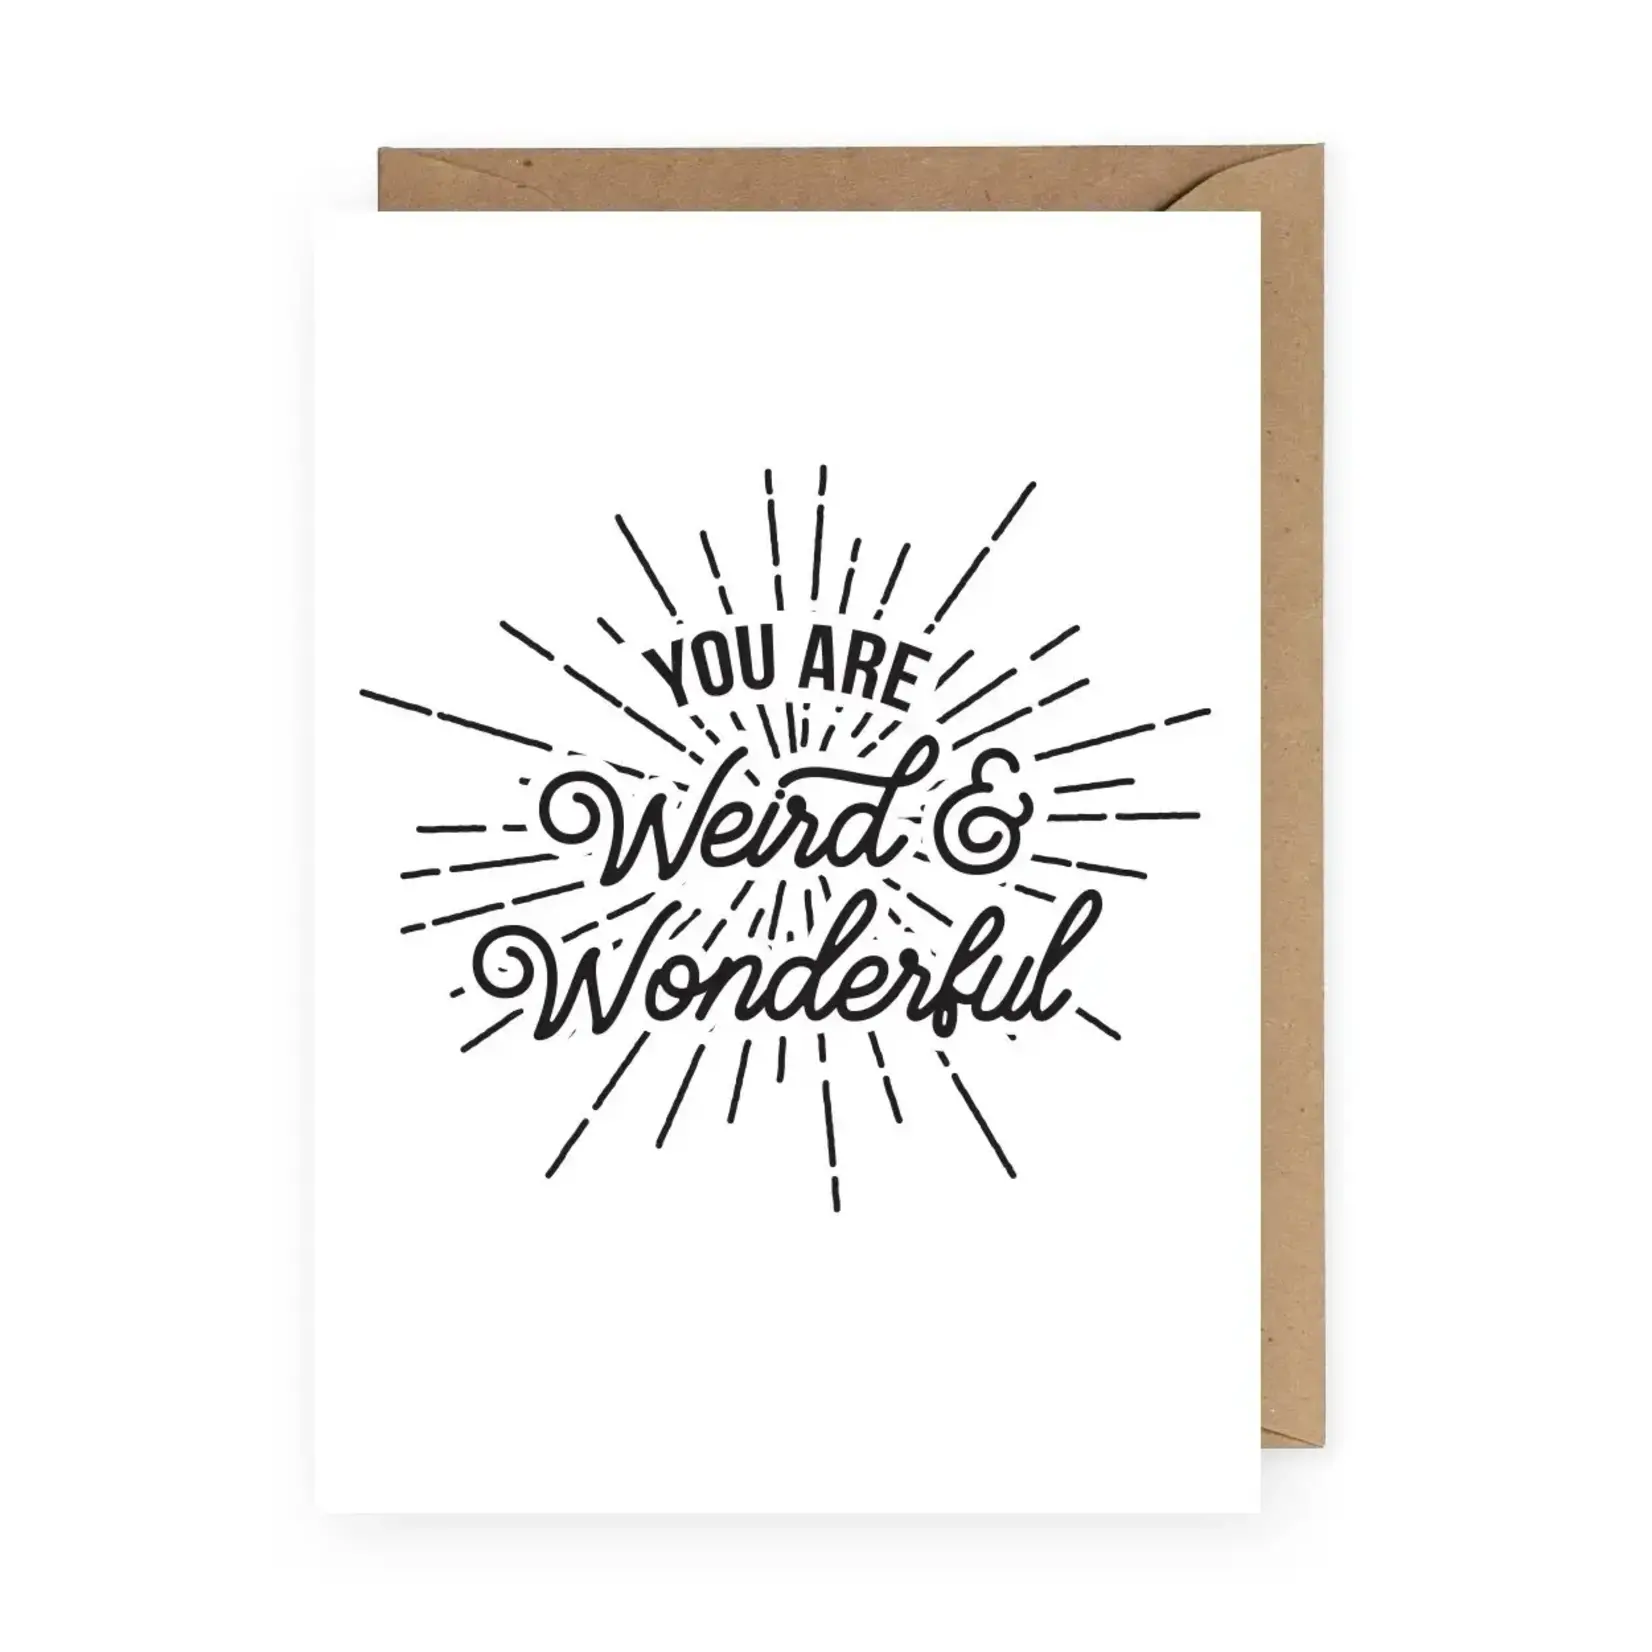 You Are Weird and Wonderful- Greeting Card